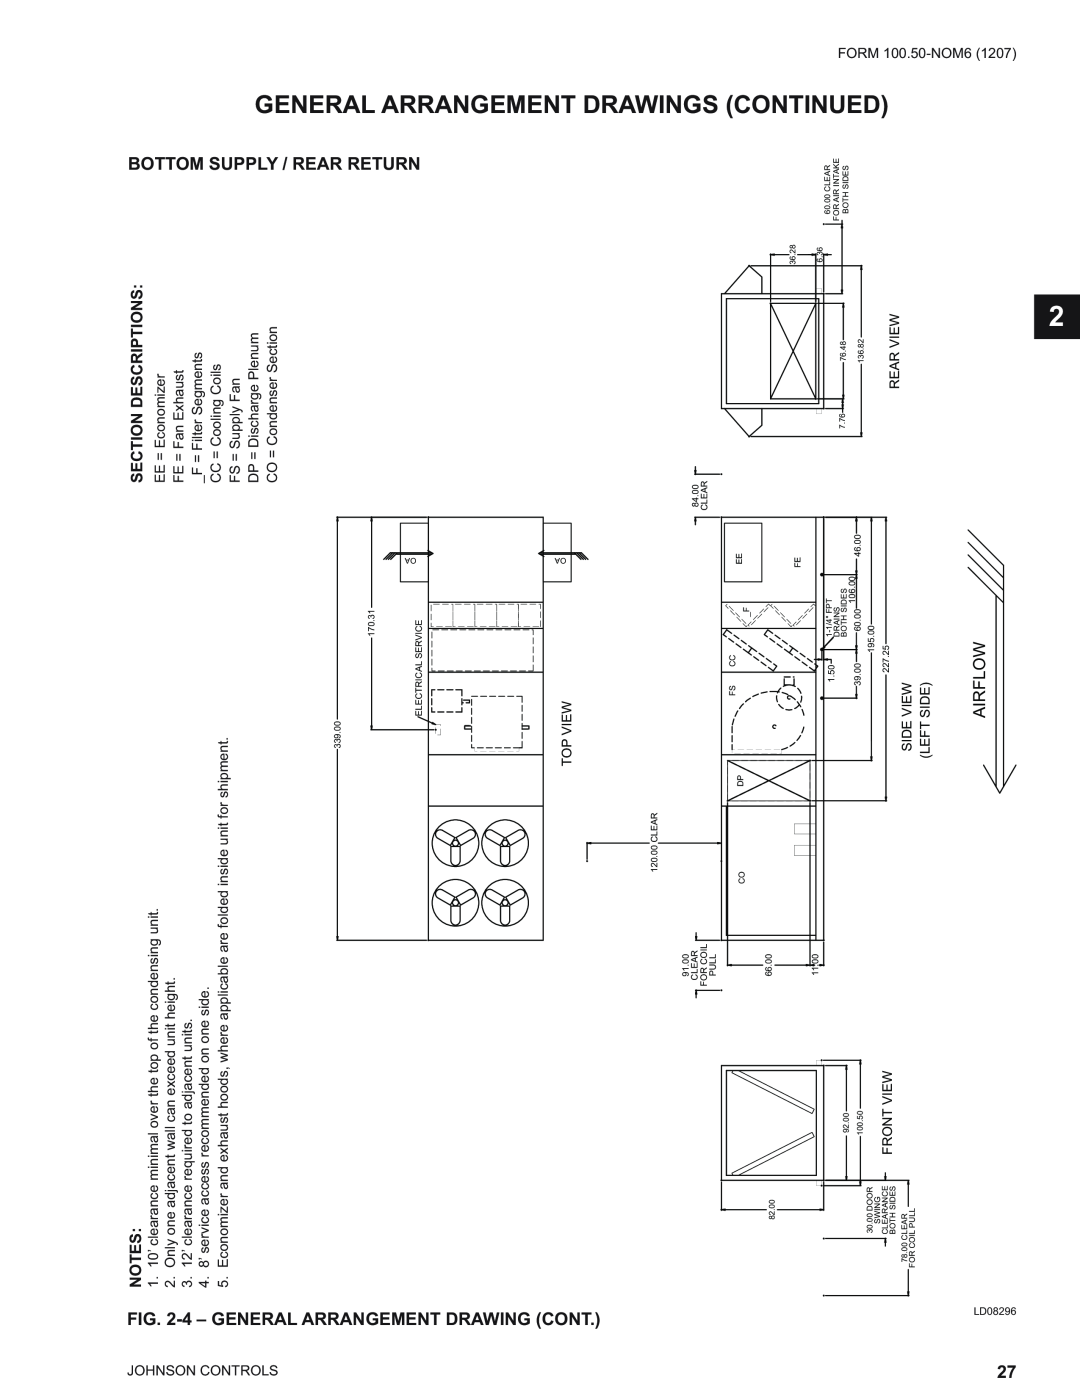 York YPAL 060 manual Continued, General Arrangementdrawings, Arrangement Drawing Cont, Bottom Supply / Rear Return, Airflow 